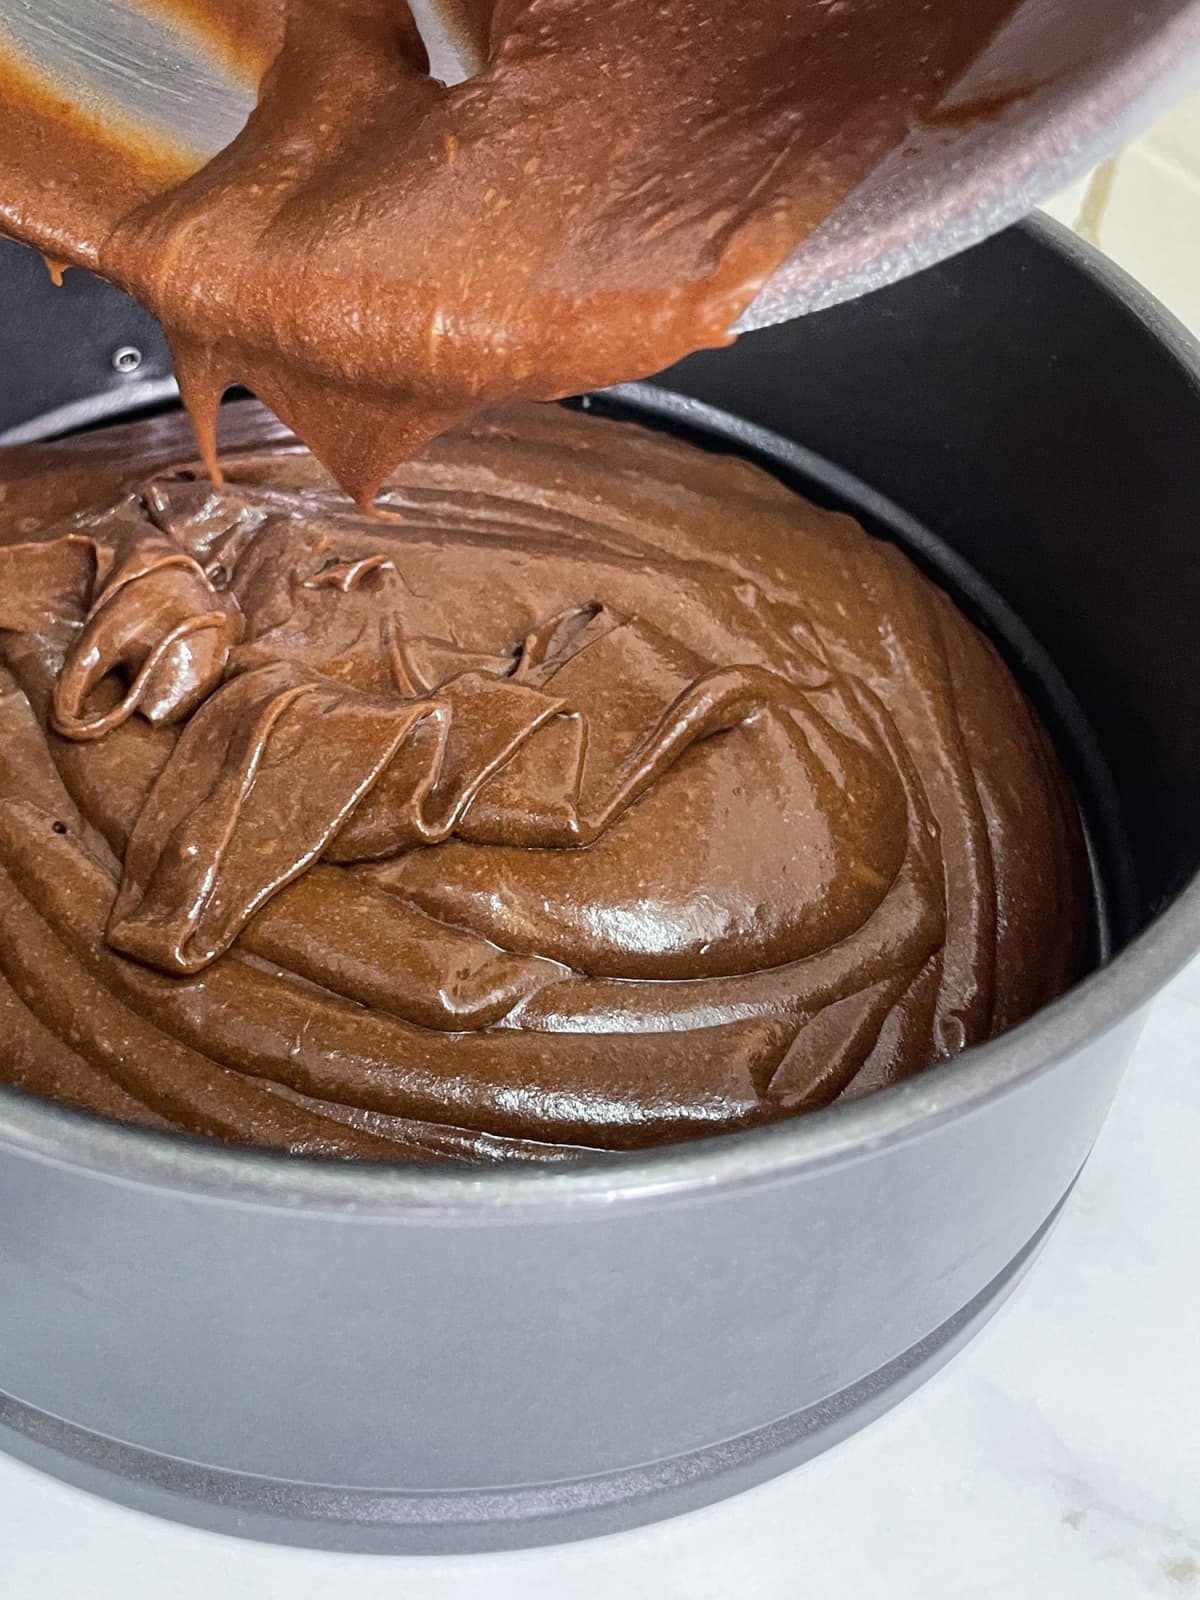 Stock photo showing close-up view of a chocolate sponge cake being made.